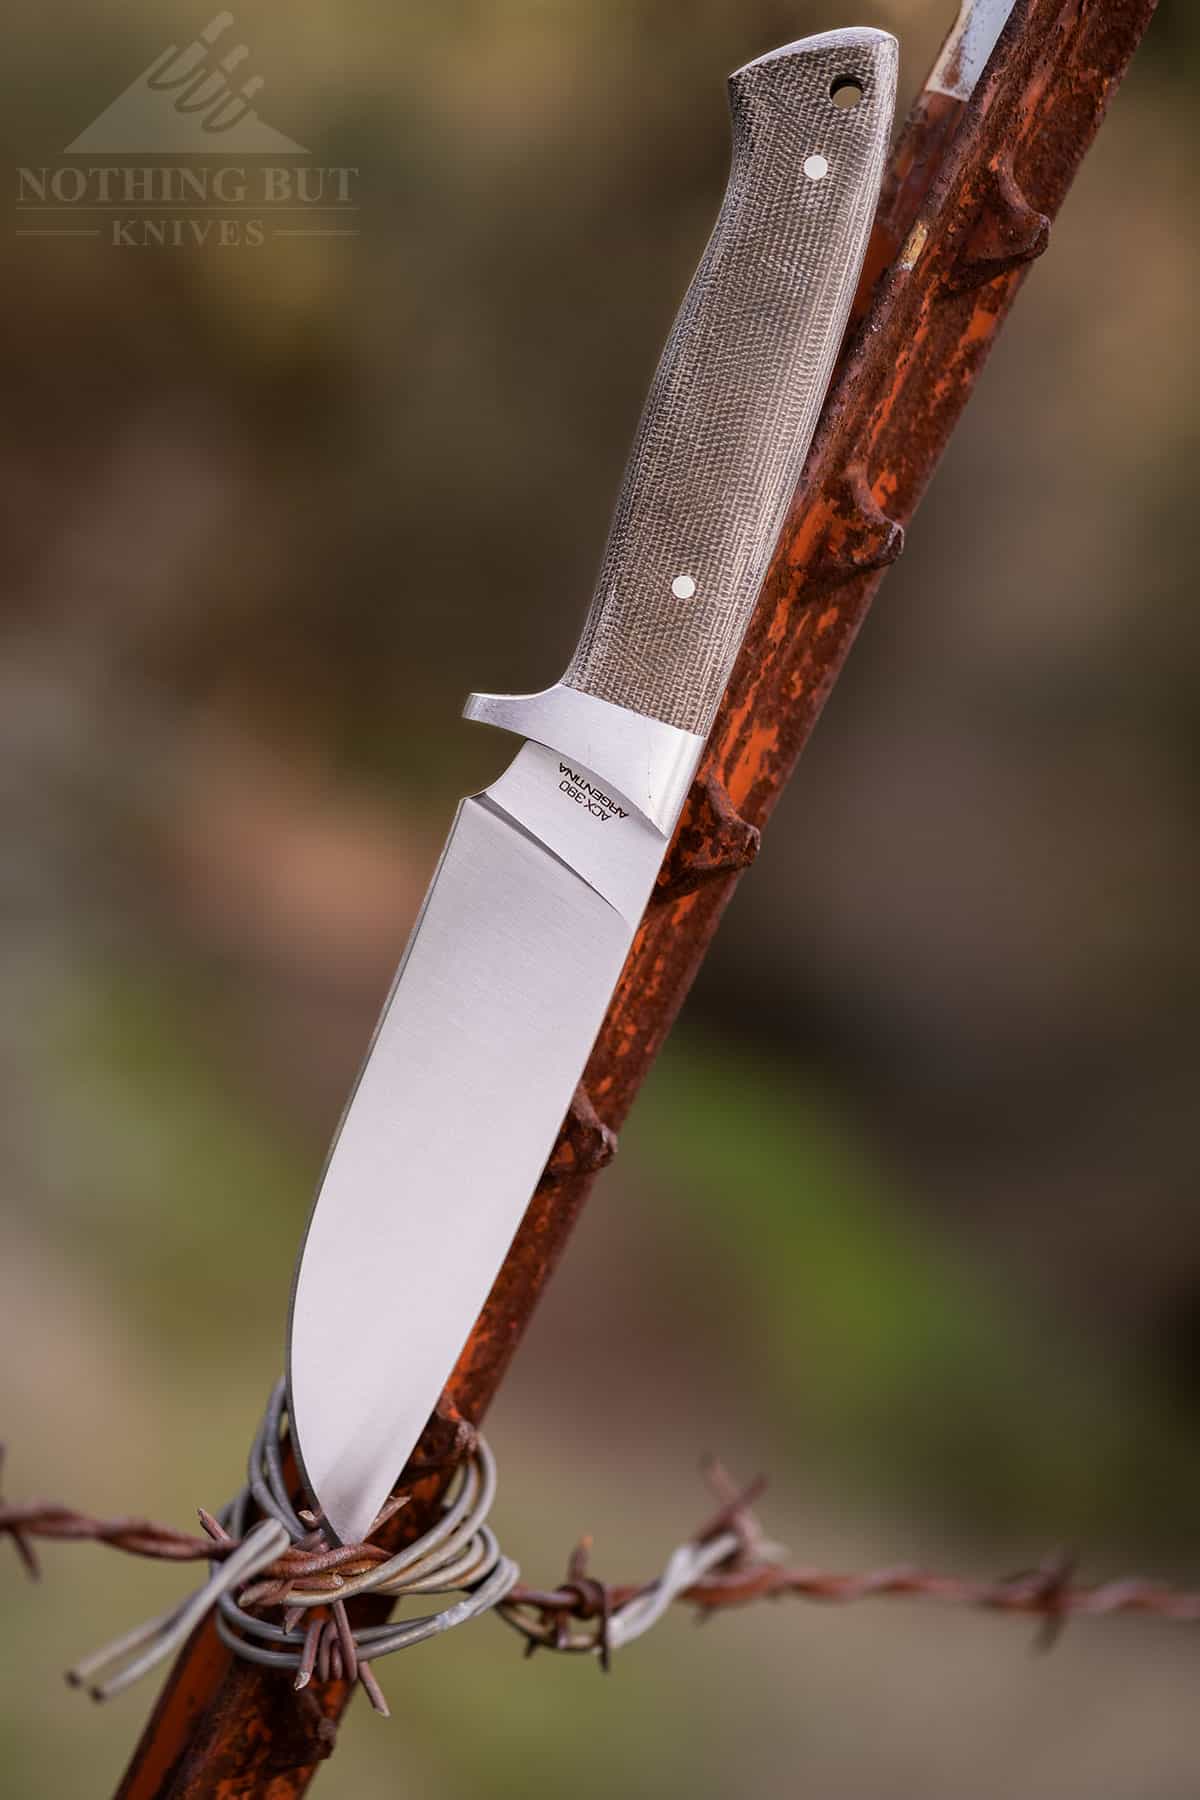 The Boker Arbolito Hunter is a great hiking or camping knife even though it was designed for hunting. 